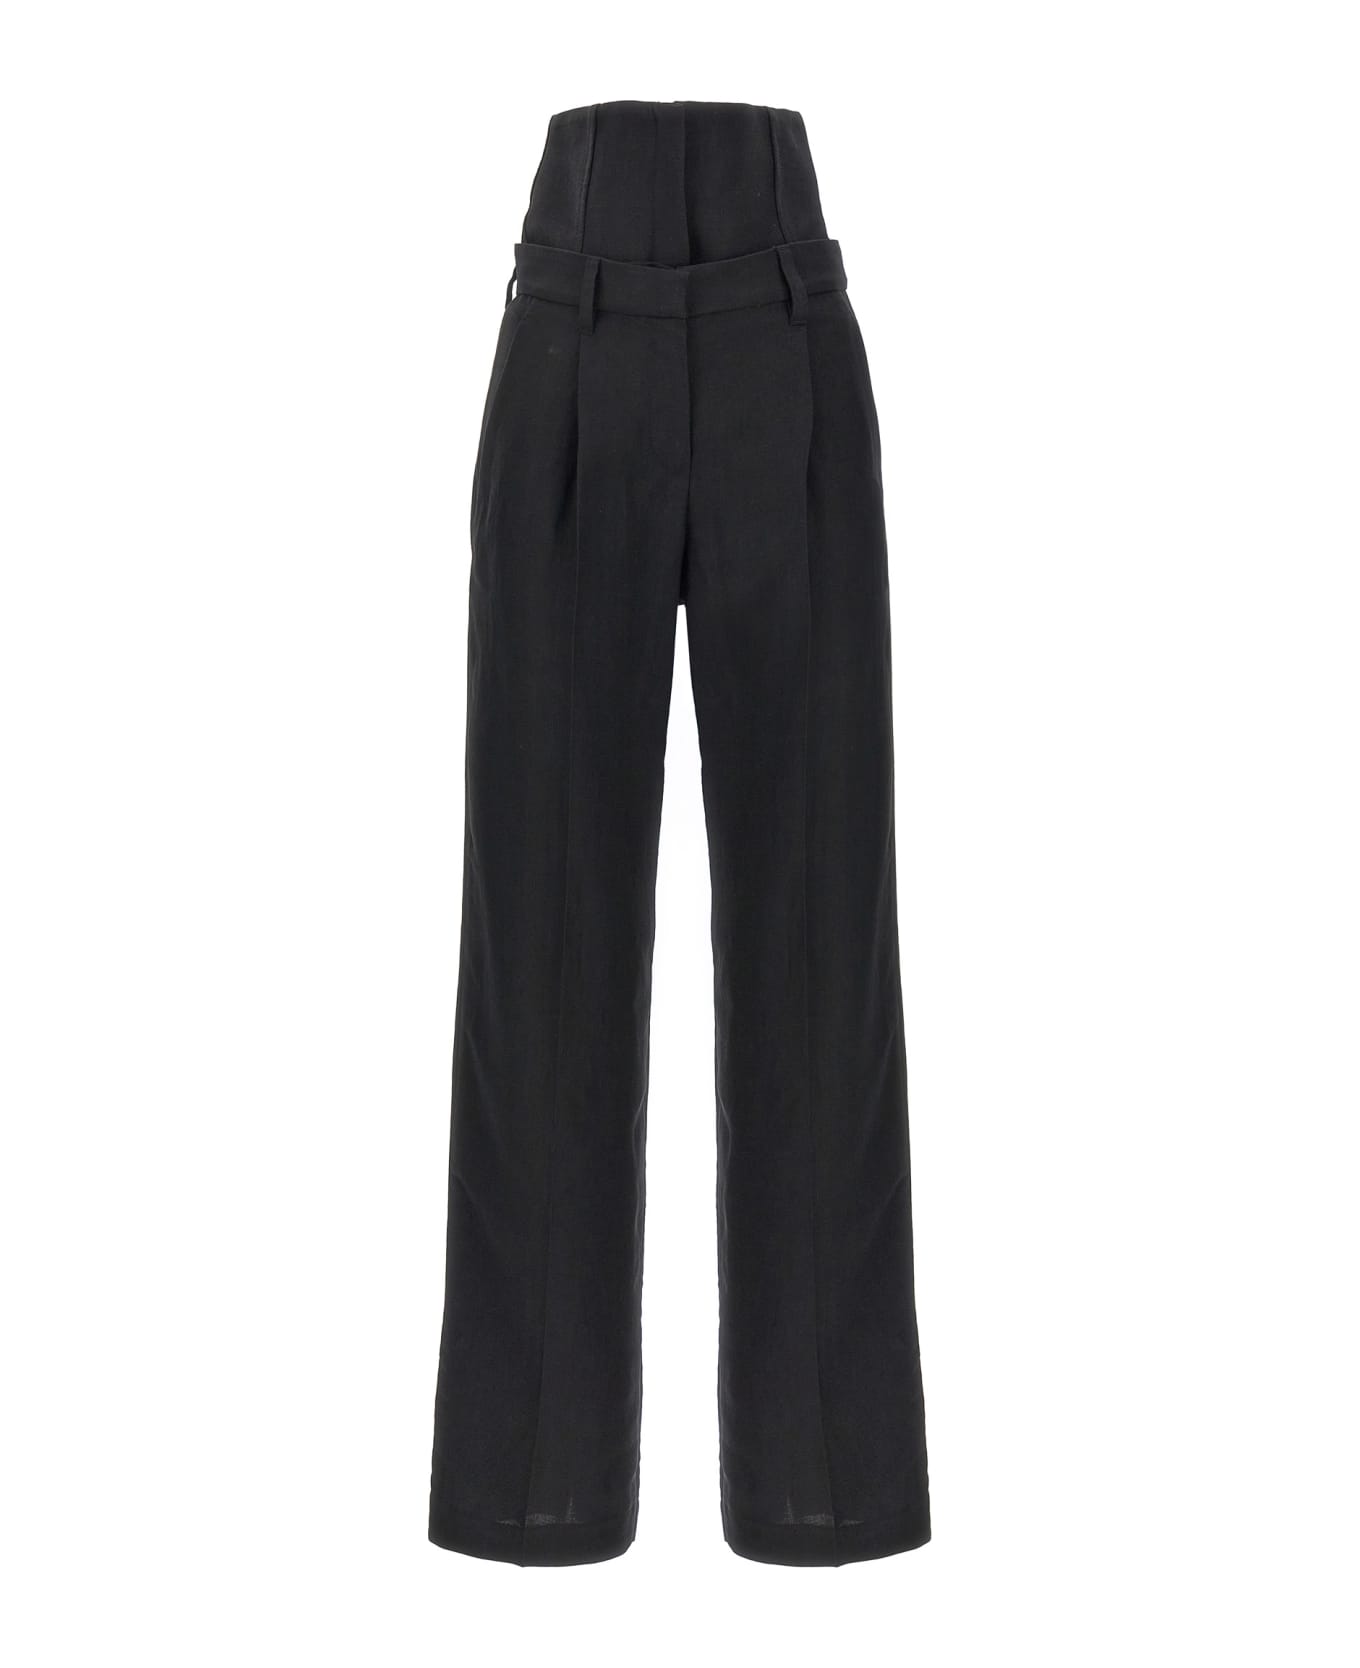 Brunello Cucinelli High Waisted Tailored Trousers - Black ボトムス